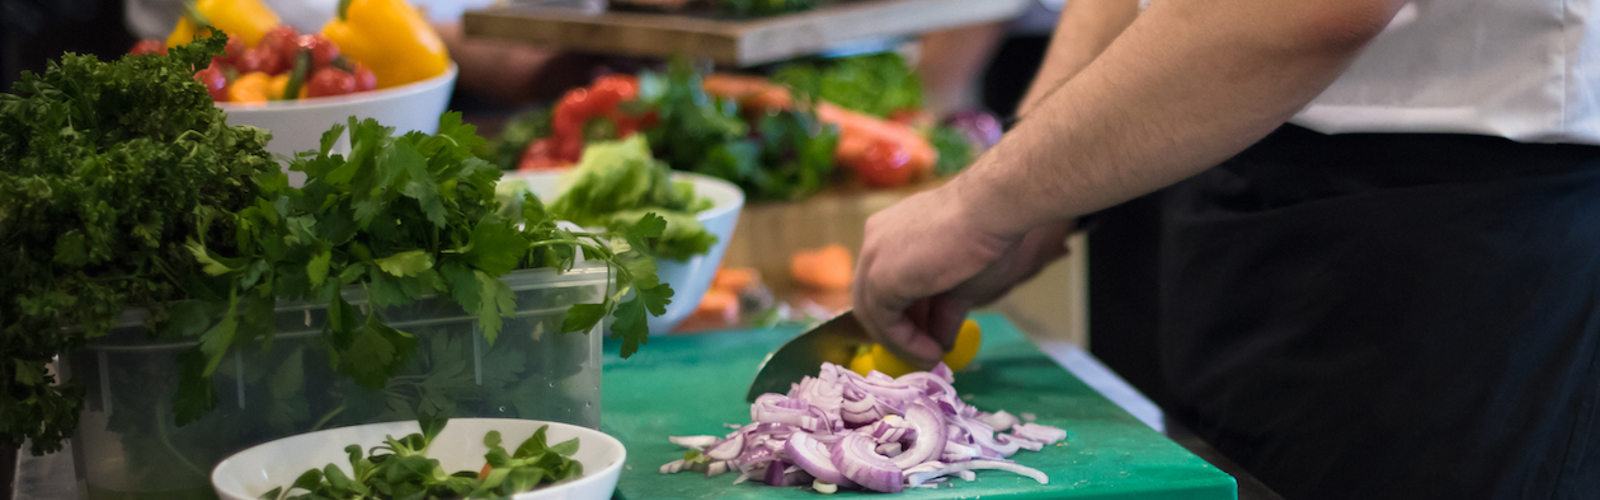 A chef's hands chopping a red onion on a green chopping board, against background of busy restaurant kitchen